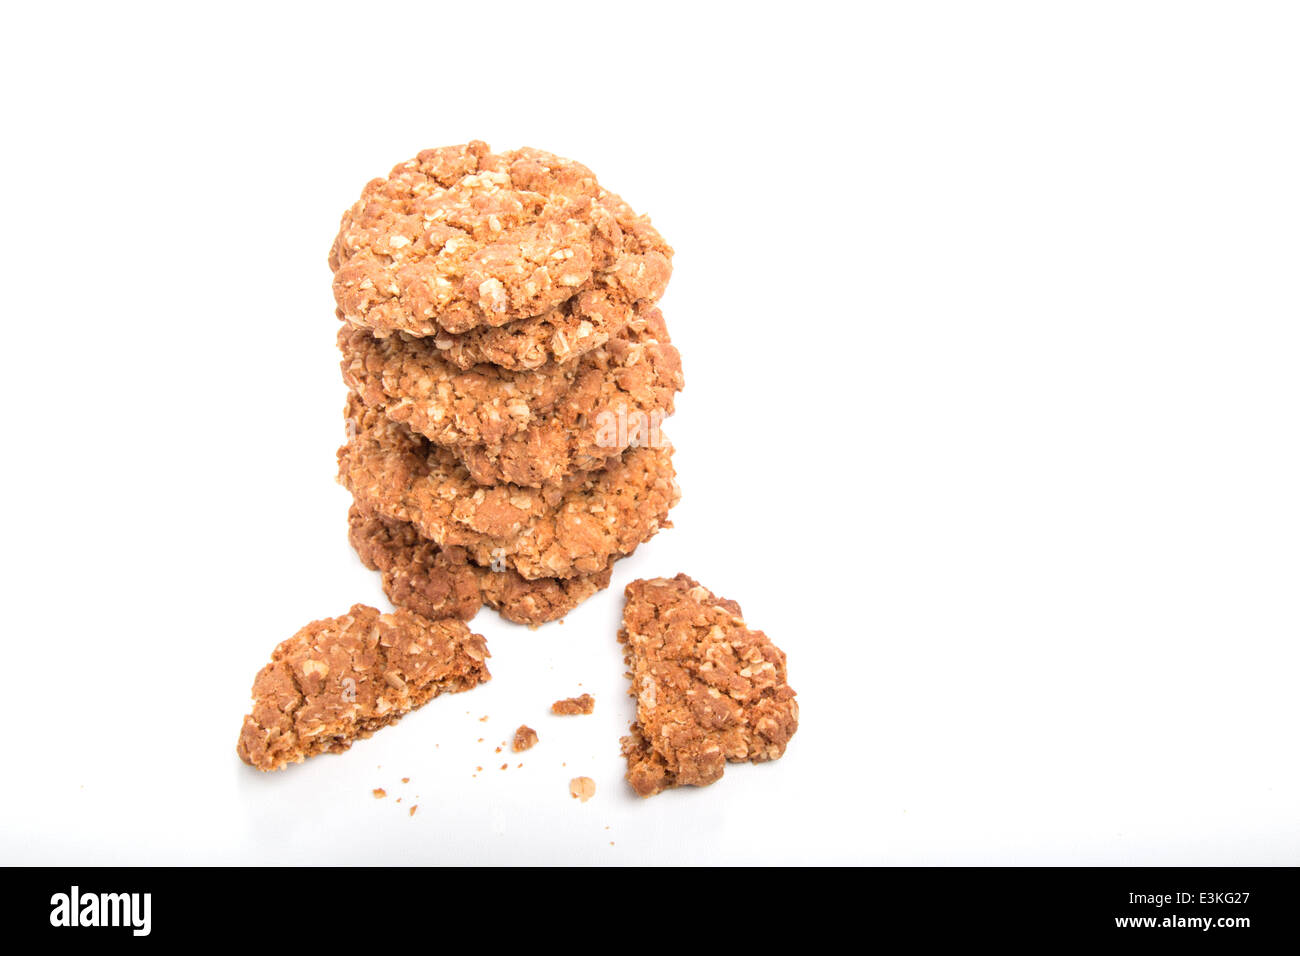 crunchy oat cookies/biscuits in a  stack on a pale background  [Pt] (13 of 16) Stock Photo